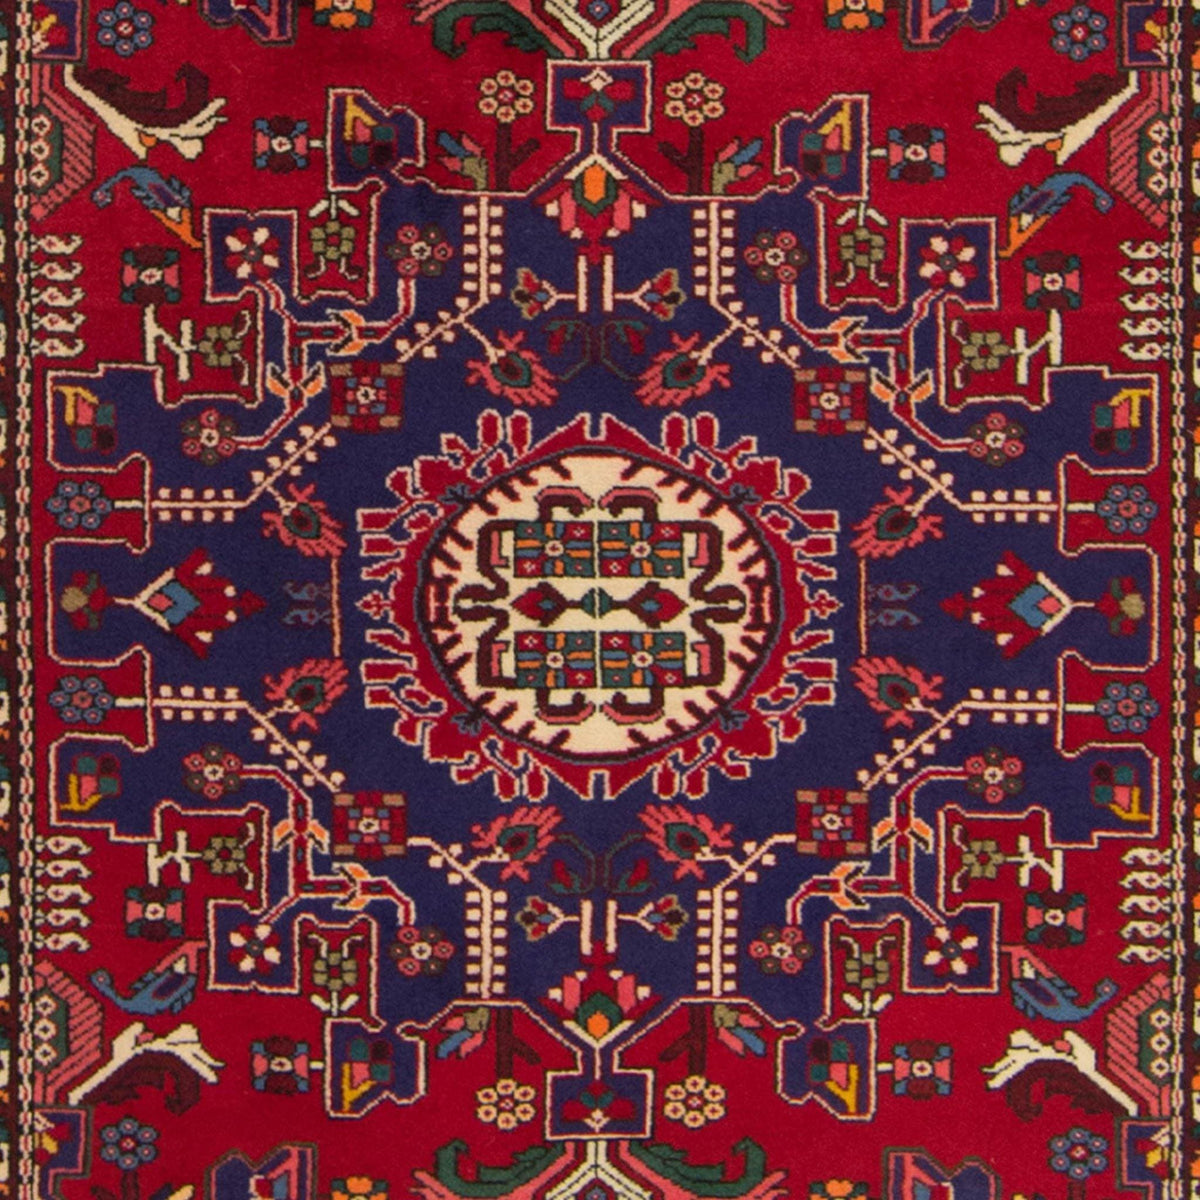 Authentic Hand-knotted Wool Persian Tafresh Rug 137cm x 202cm